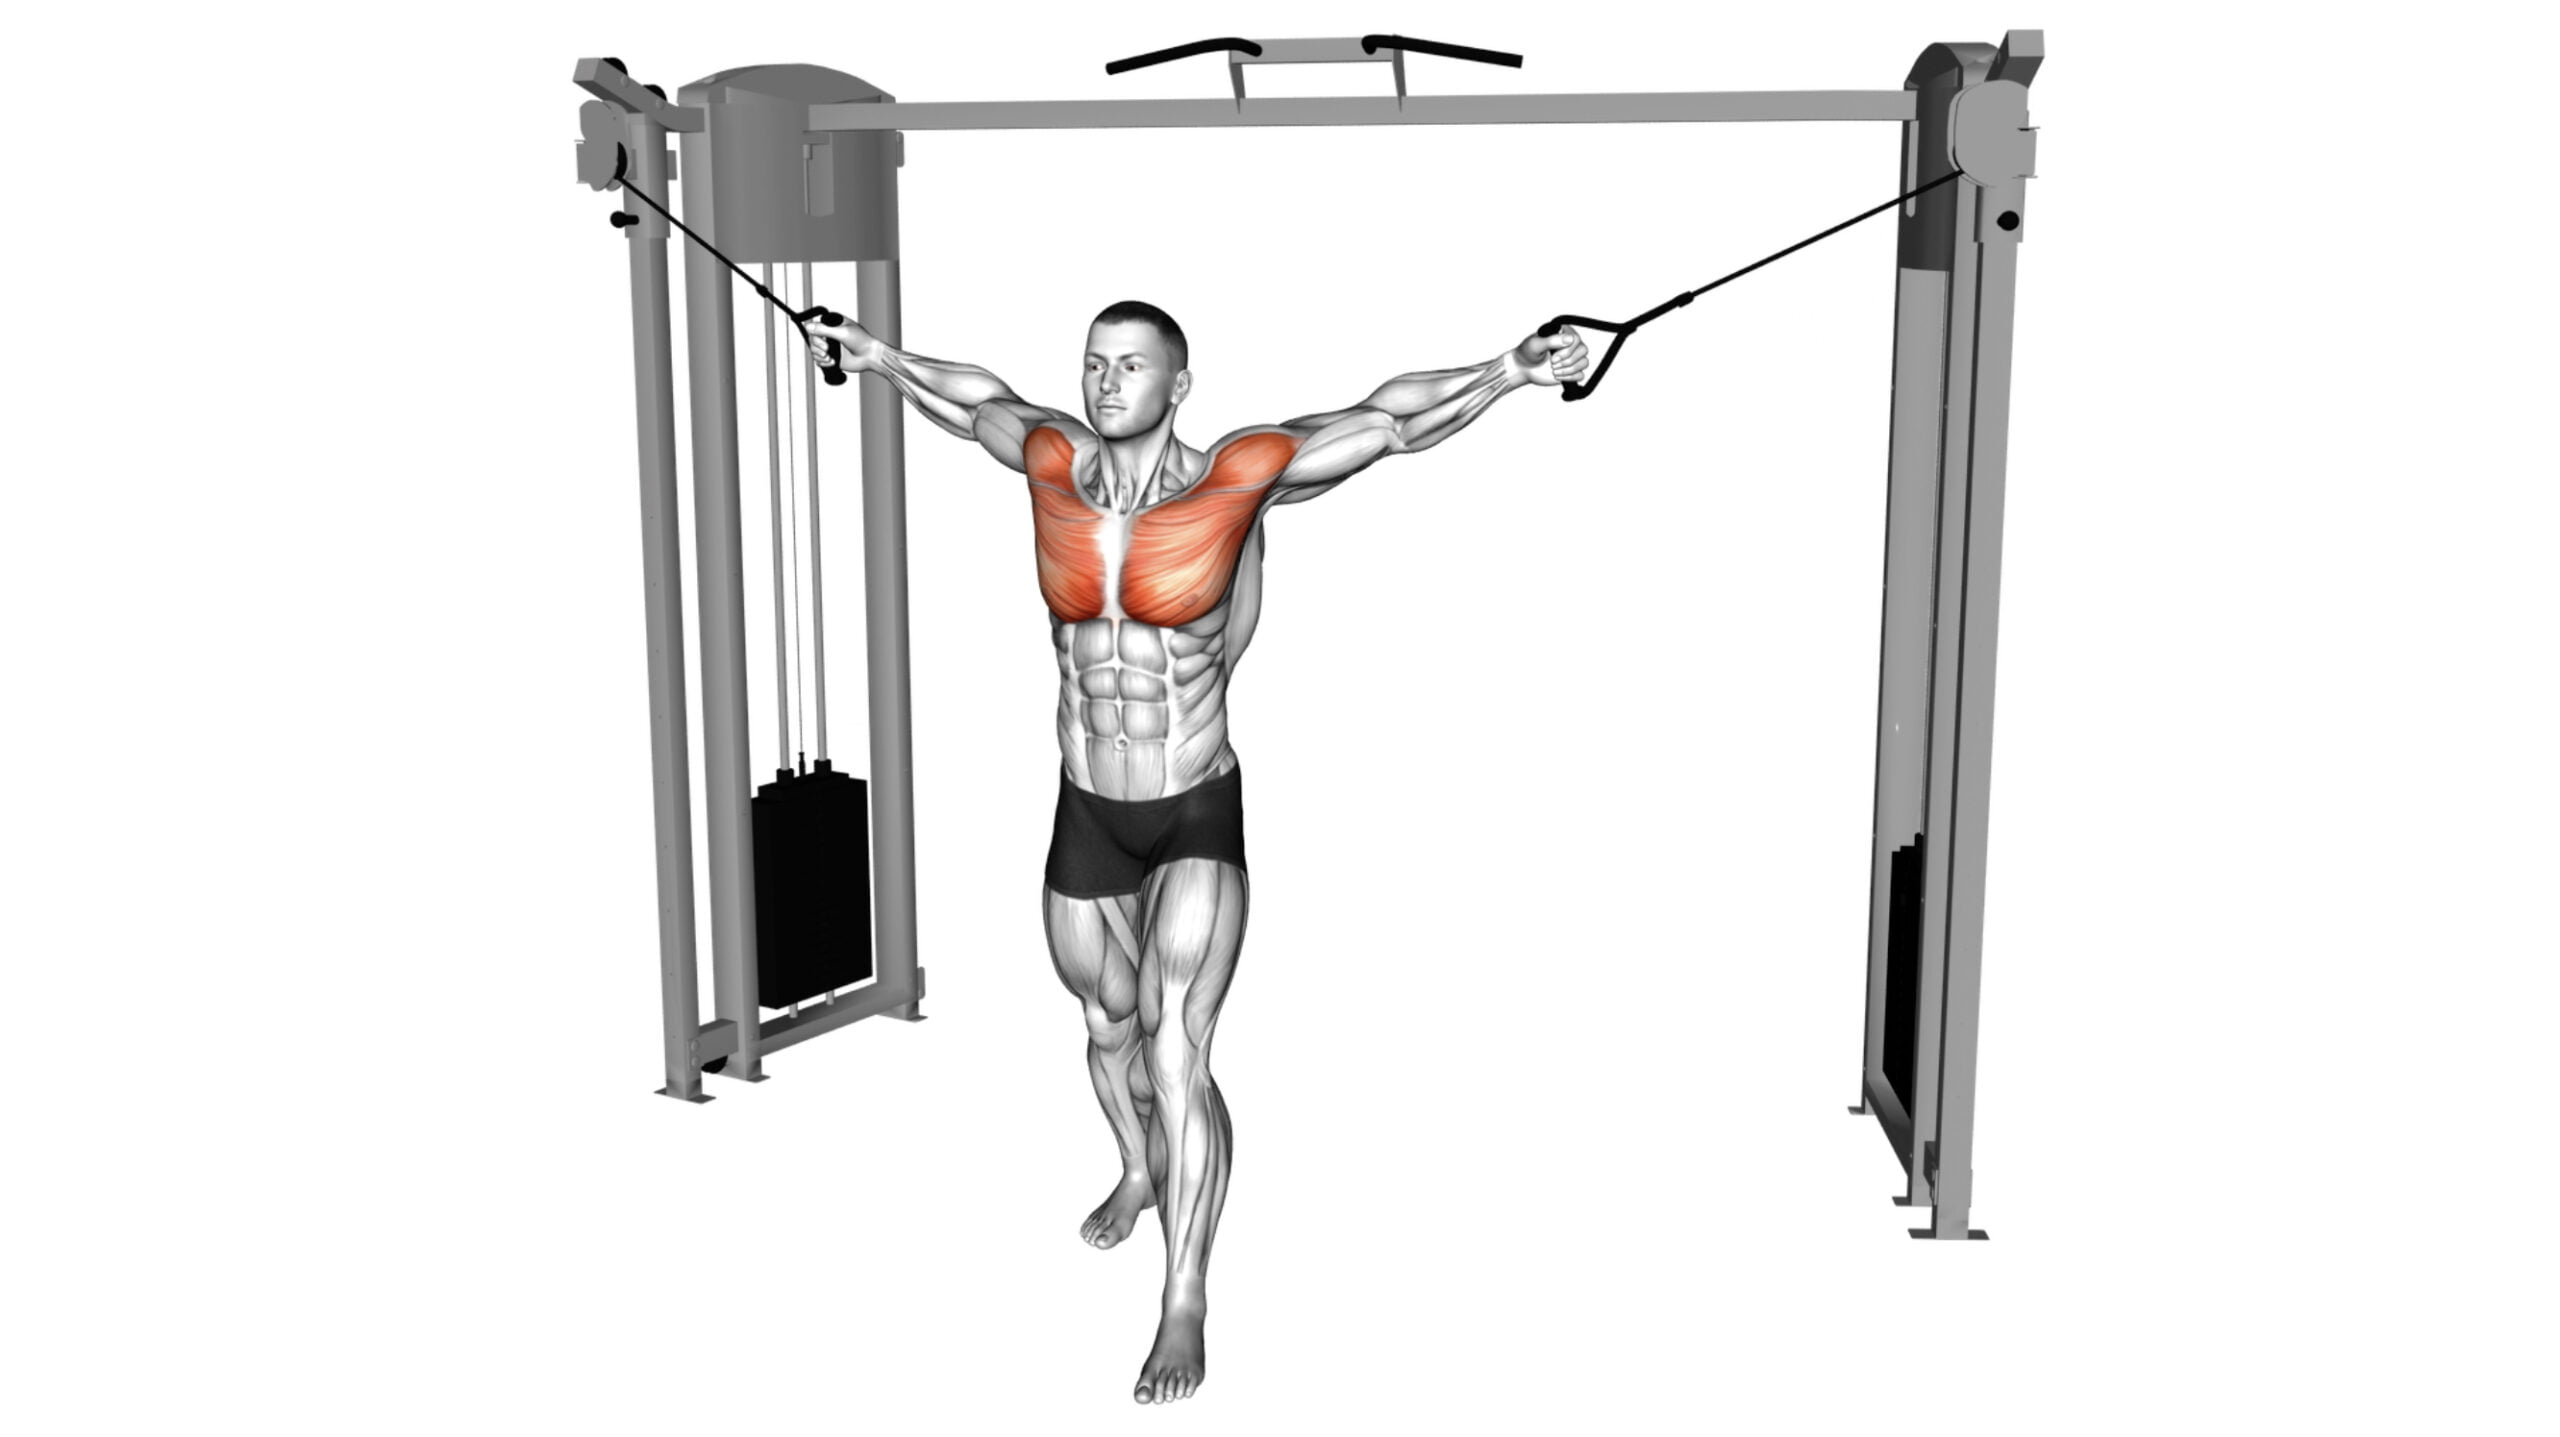 10 Essential Chest Exercises On The Cable Machine For Building Strength And Size